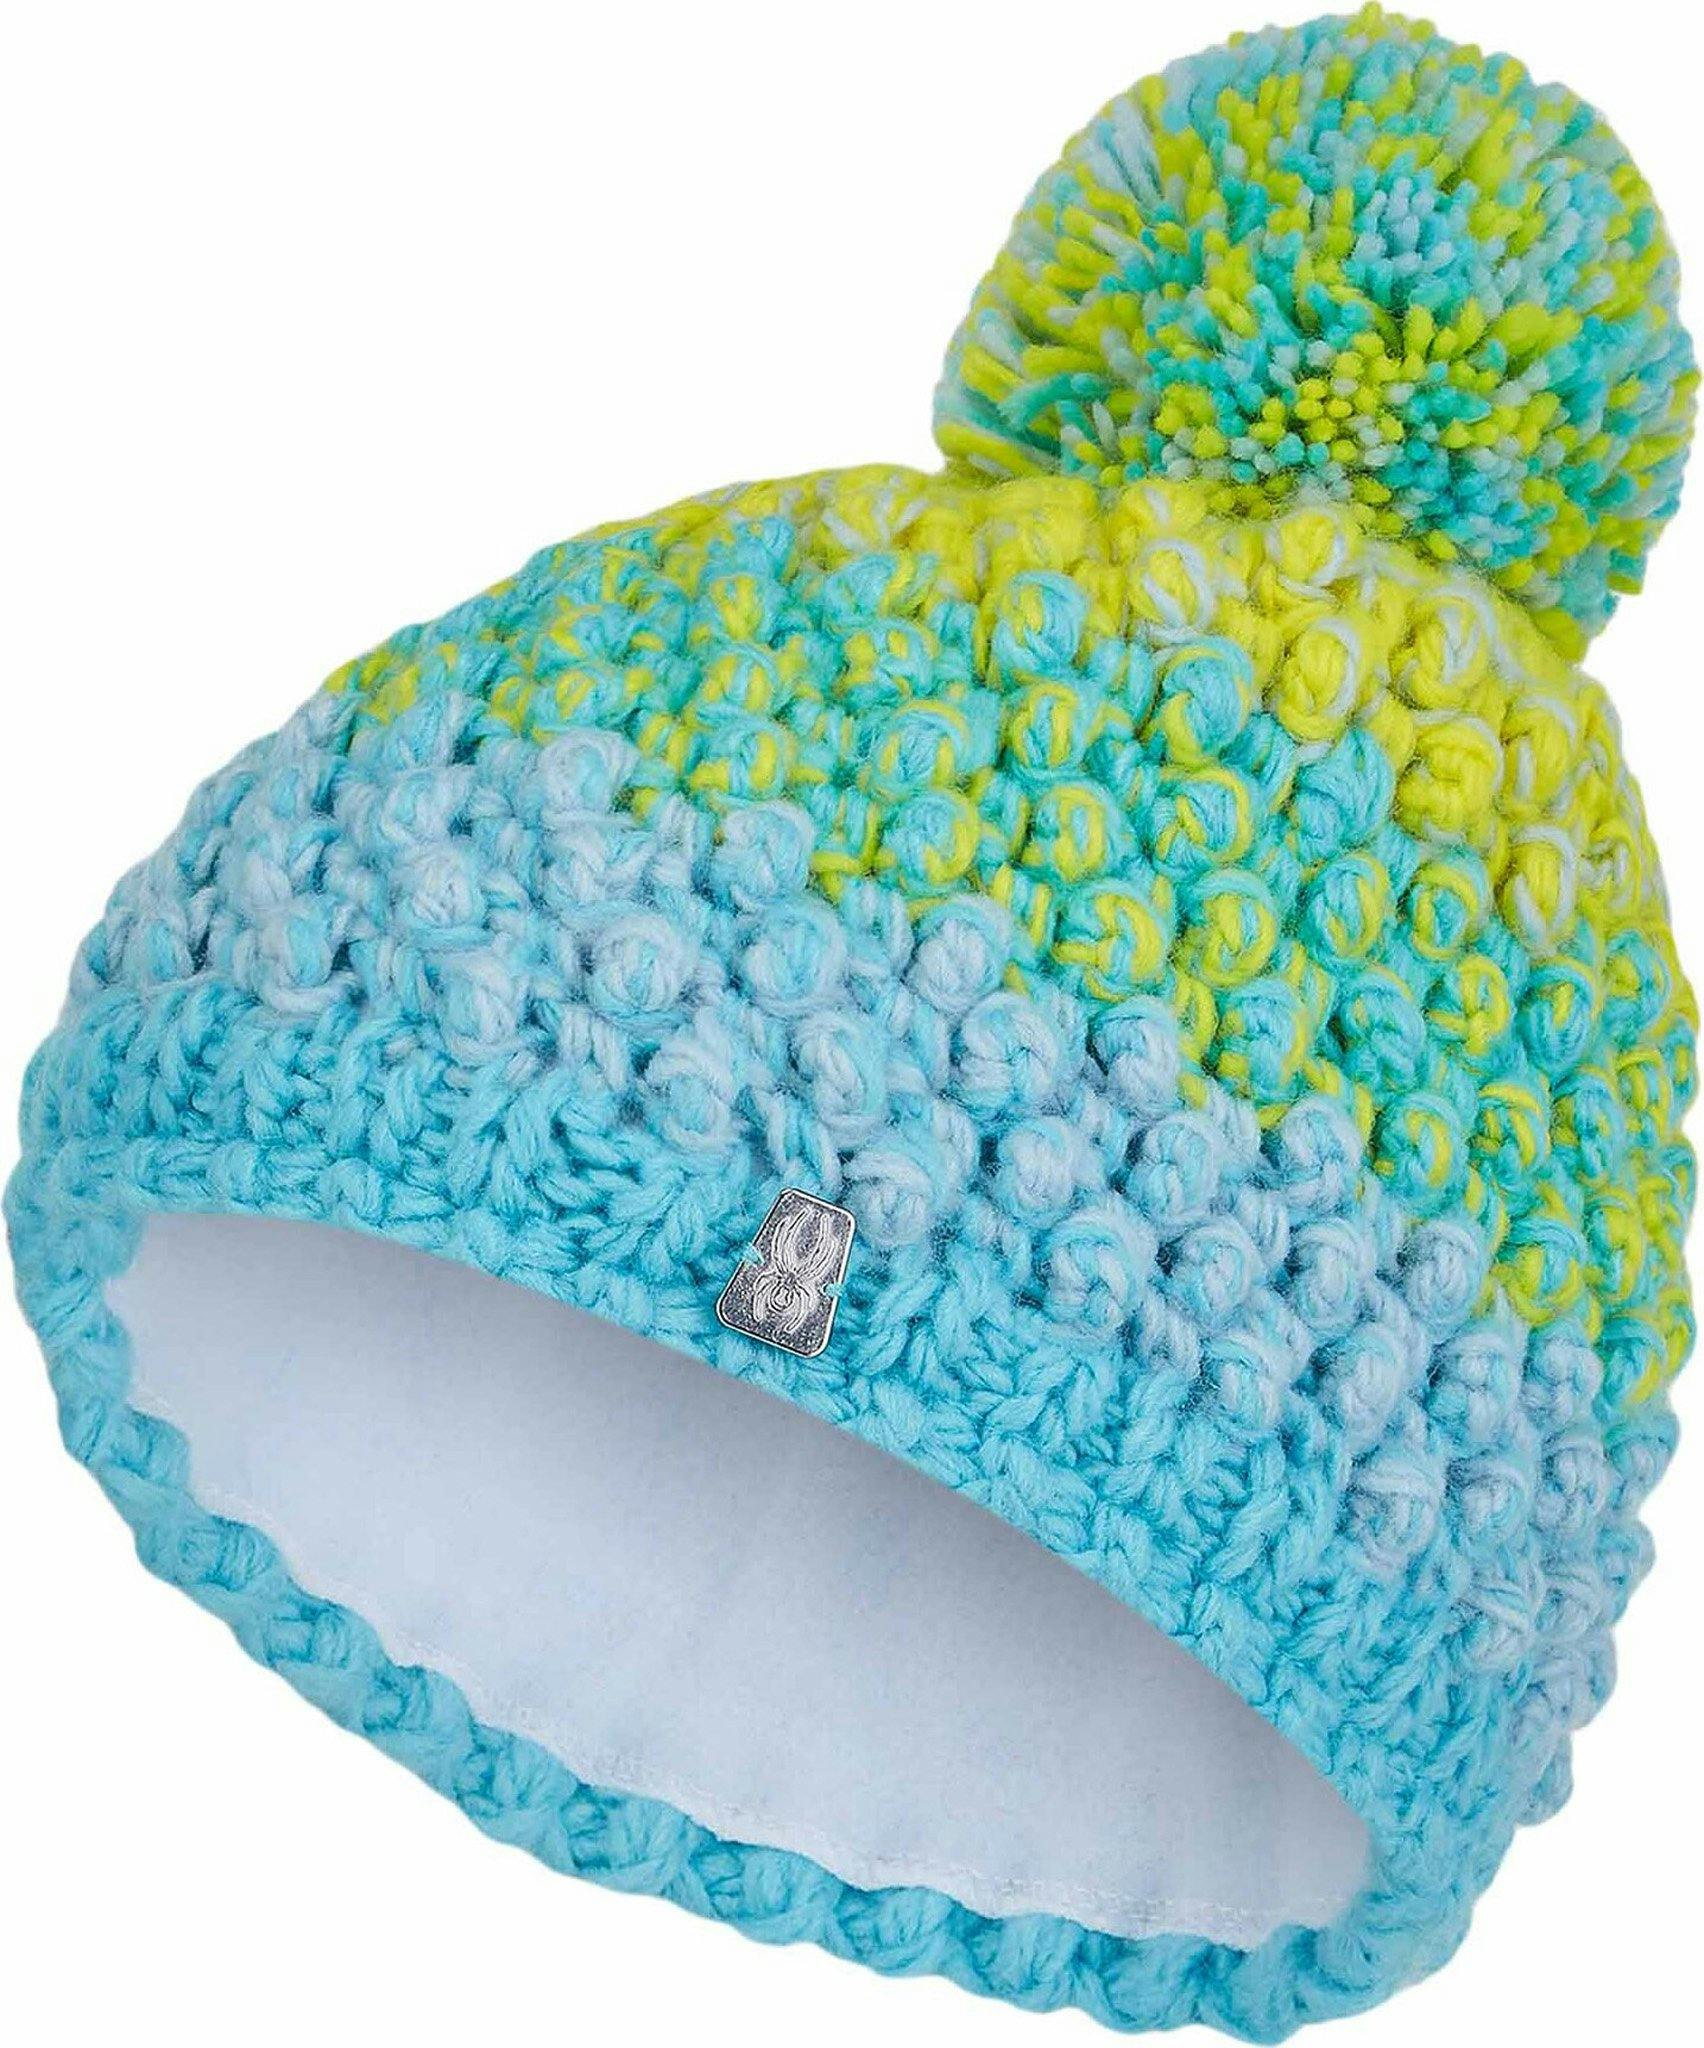 Product image for Bitsy Brrr Berry Beanie - Little Kids